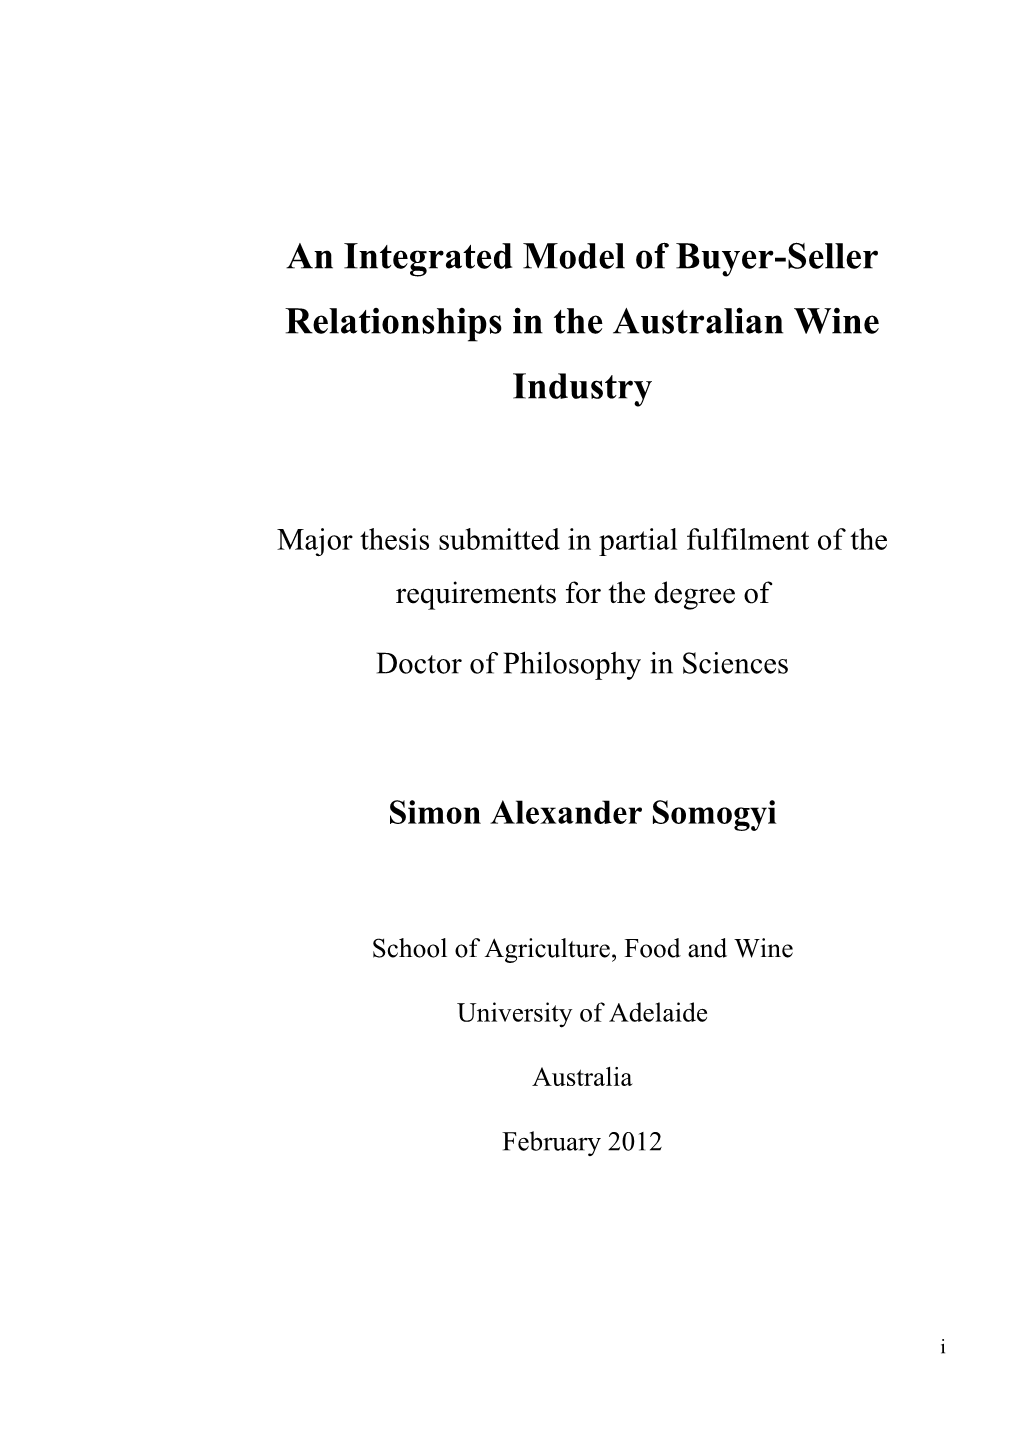 An Integrated Model of Buyer-Seller Relationships in the Australian Wine Industry